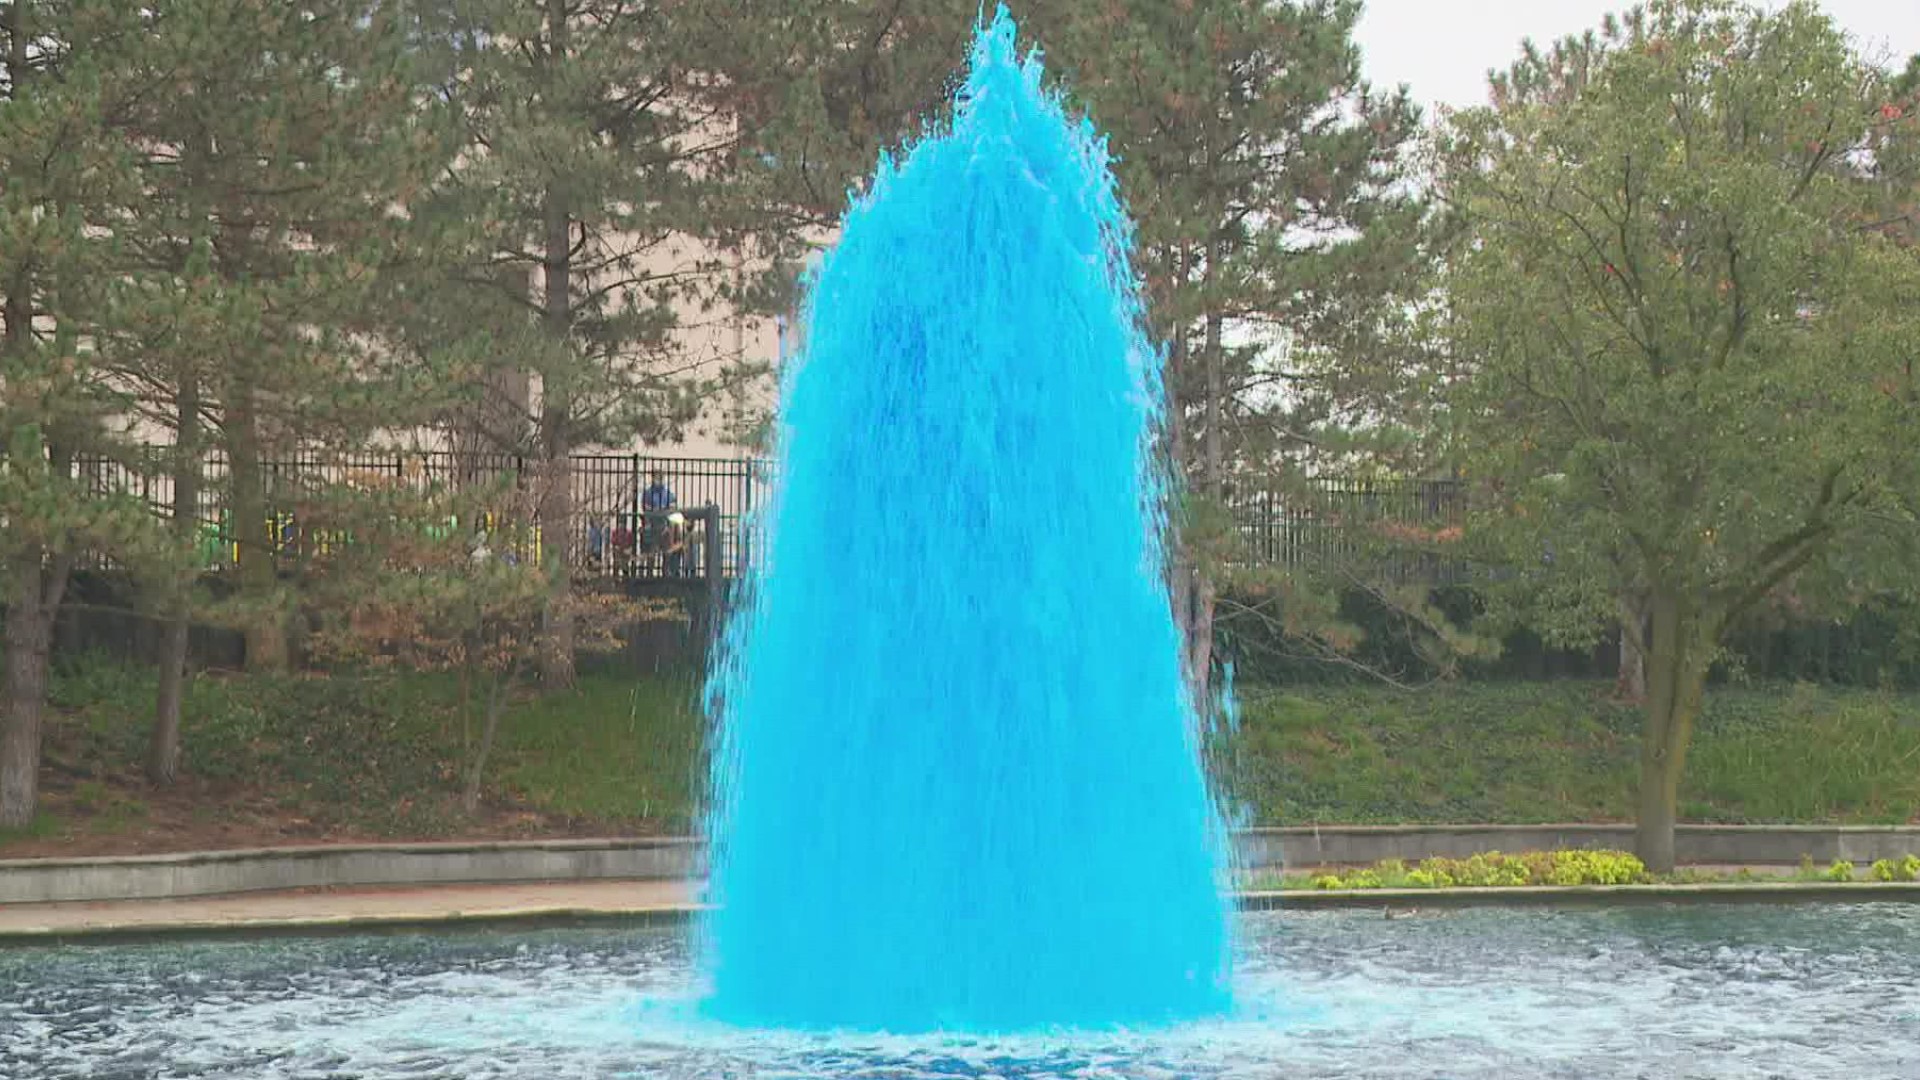 The downtown Indianapolis canal was dyed blue to celebrate Indianapolis Public Schools.